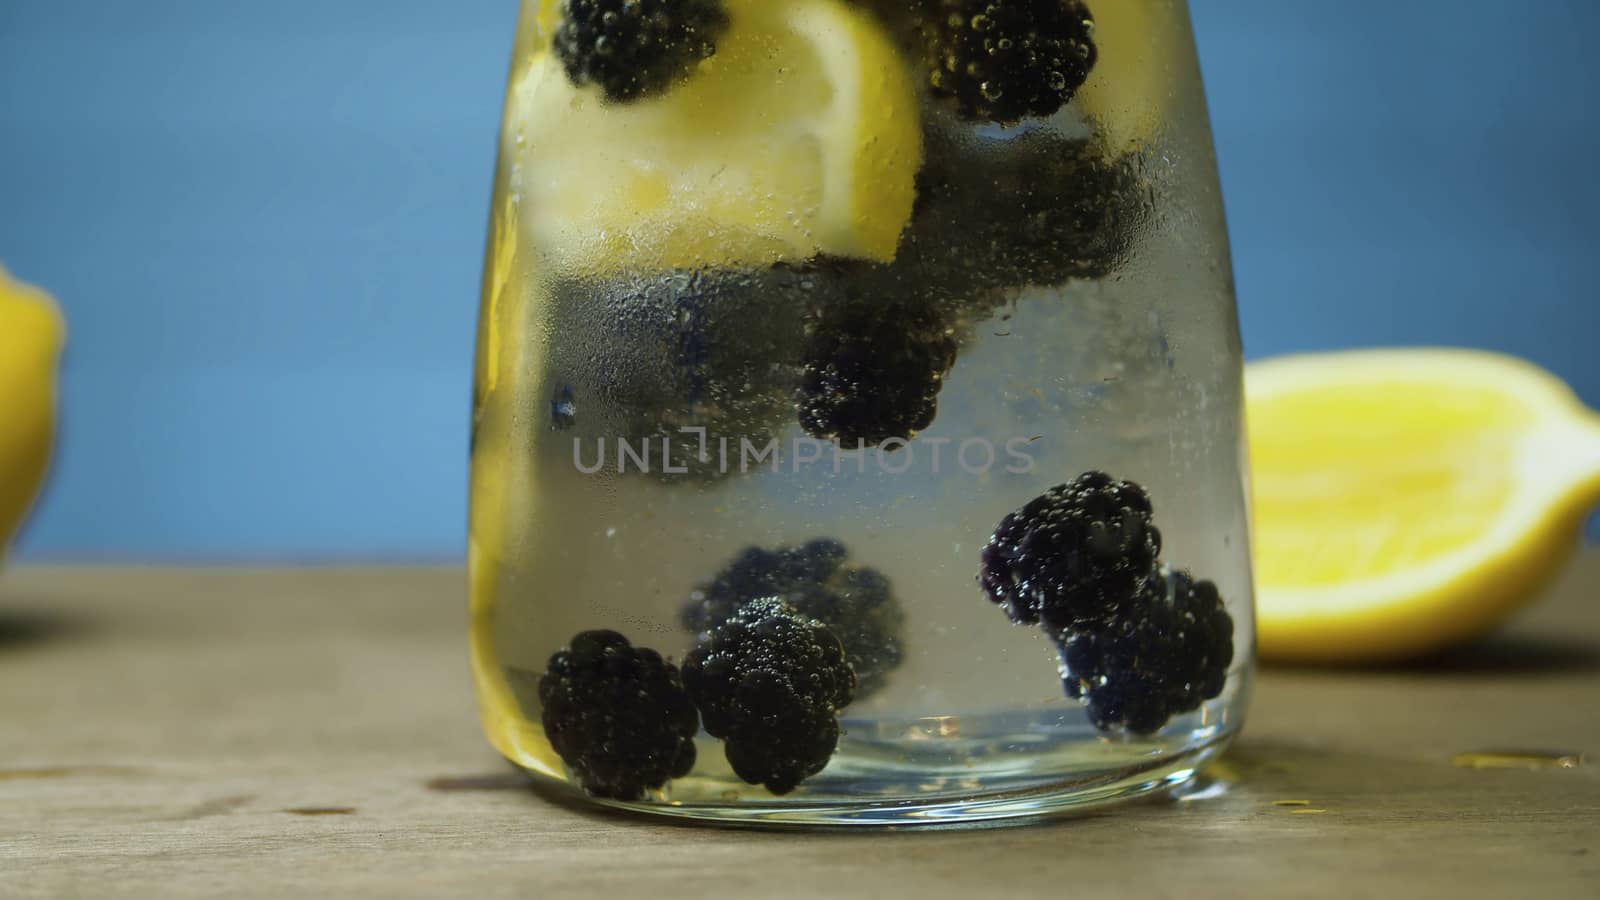 Close up dewberry lemonade in glass jug. Blurry lamps on blue background